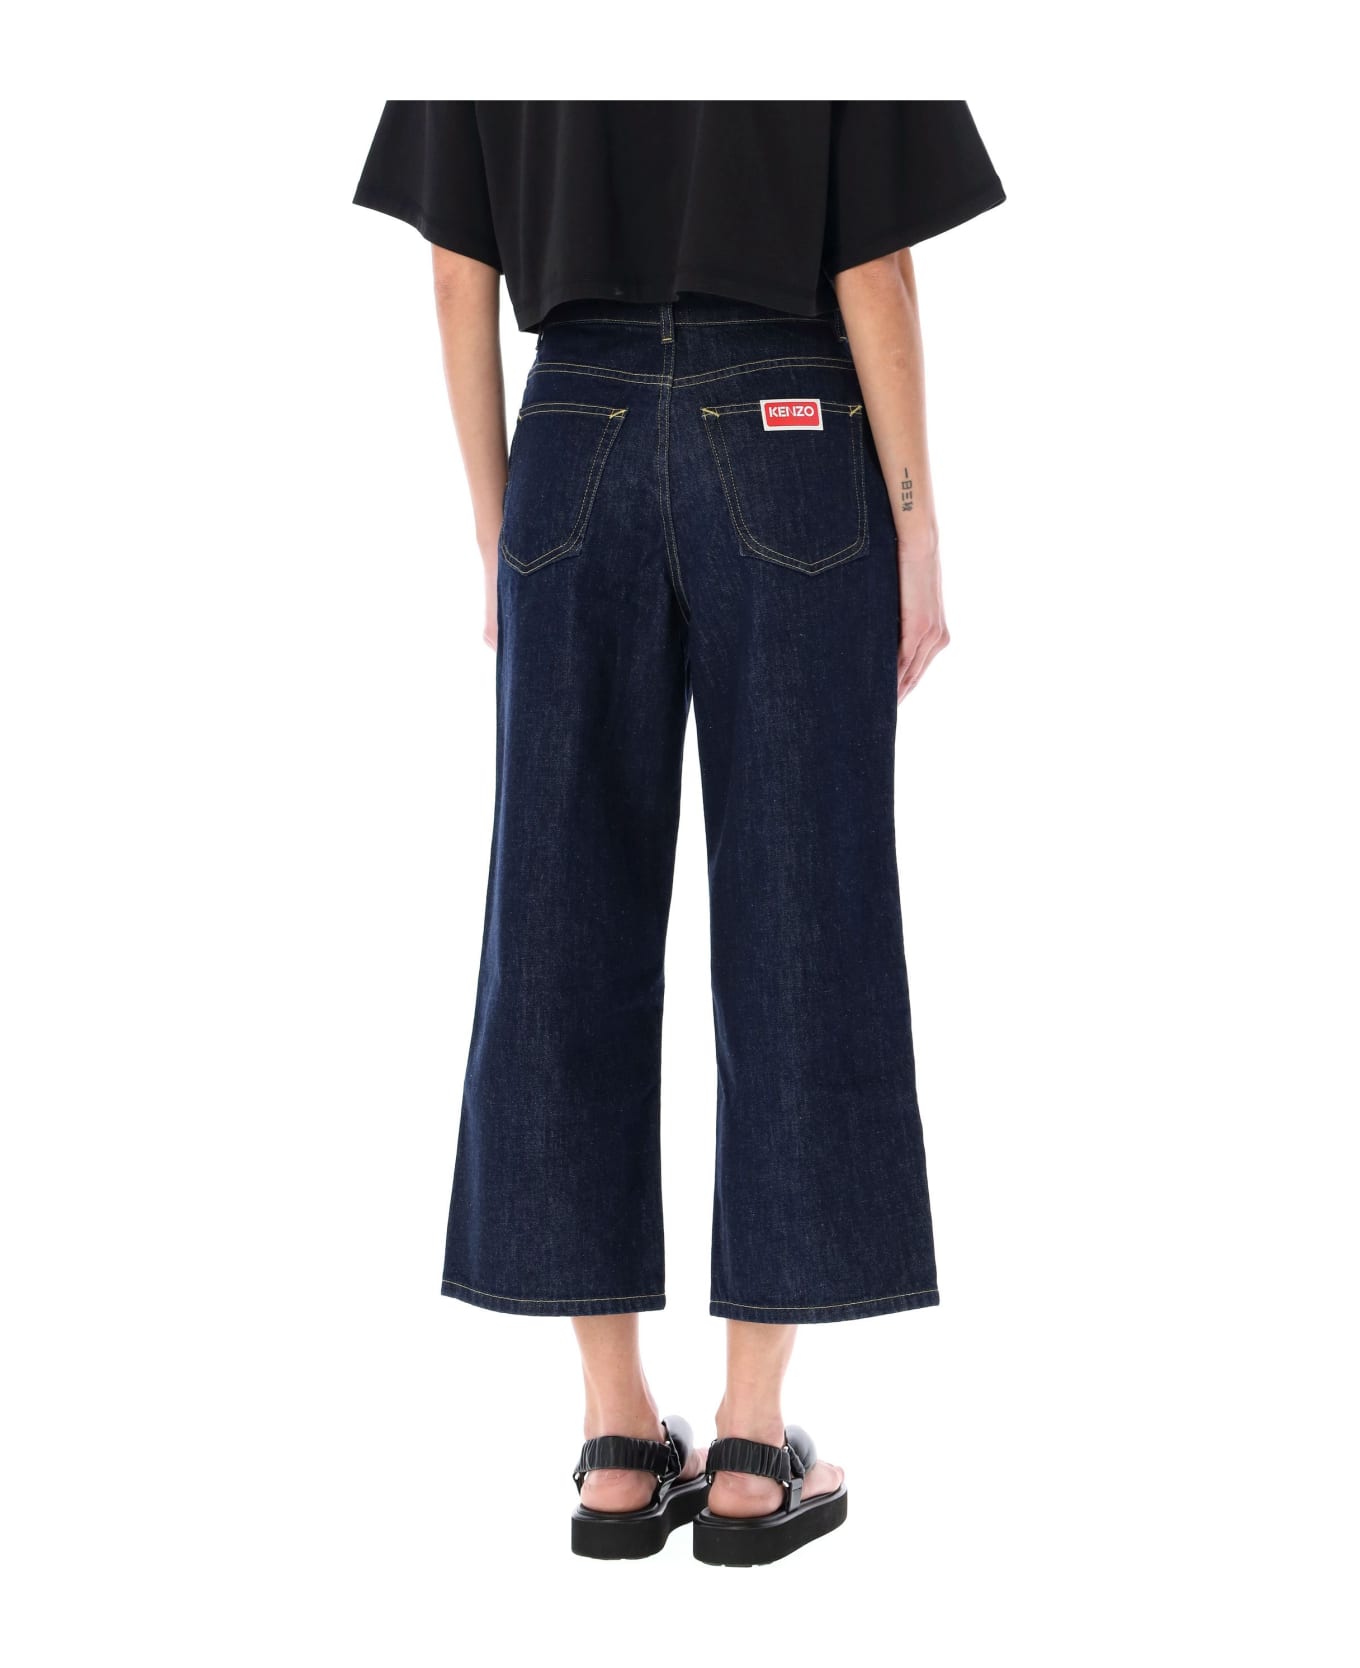 Kenzo Sumire Cropped Jeans - RINSED BLUE DENIN